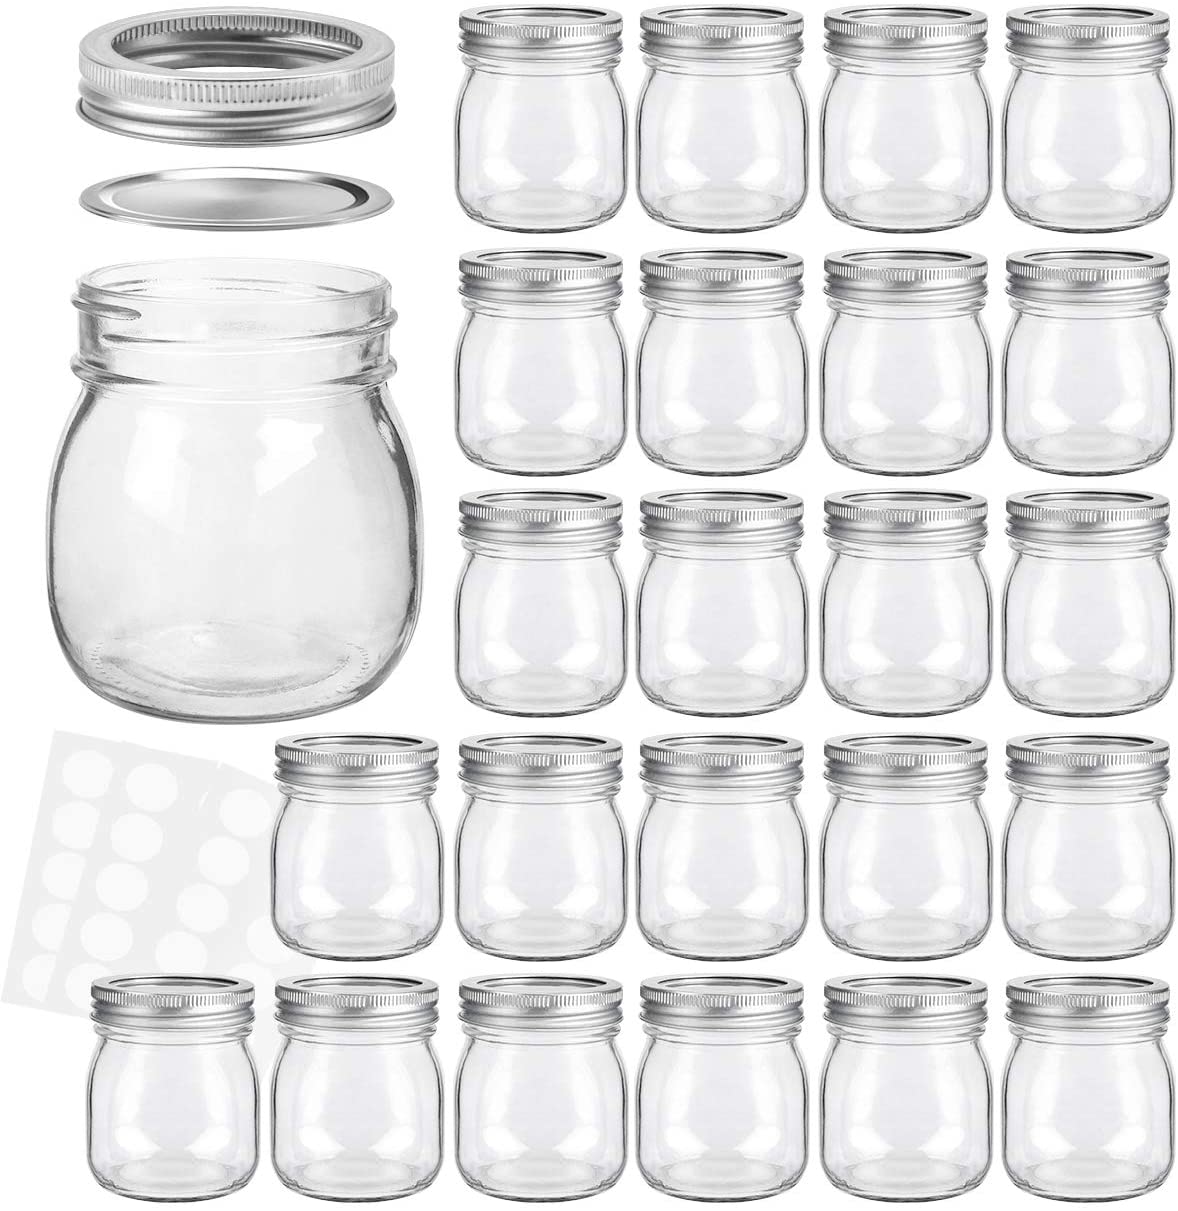 300ml 10oz wide mouth Glass mason jars with metal lid for Jam Jelly Honey